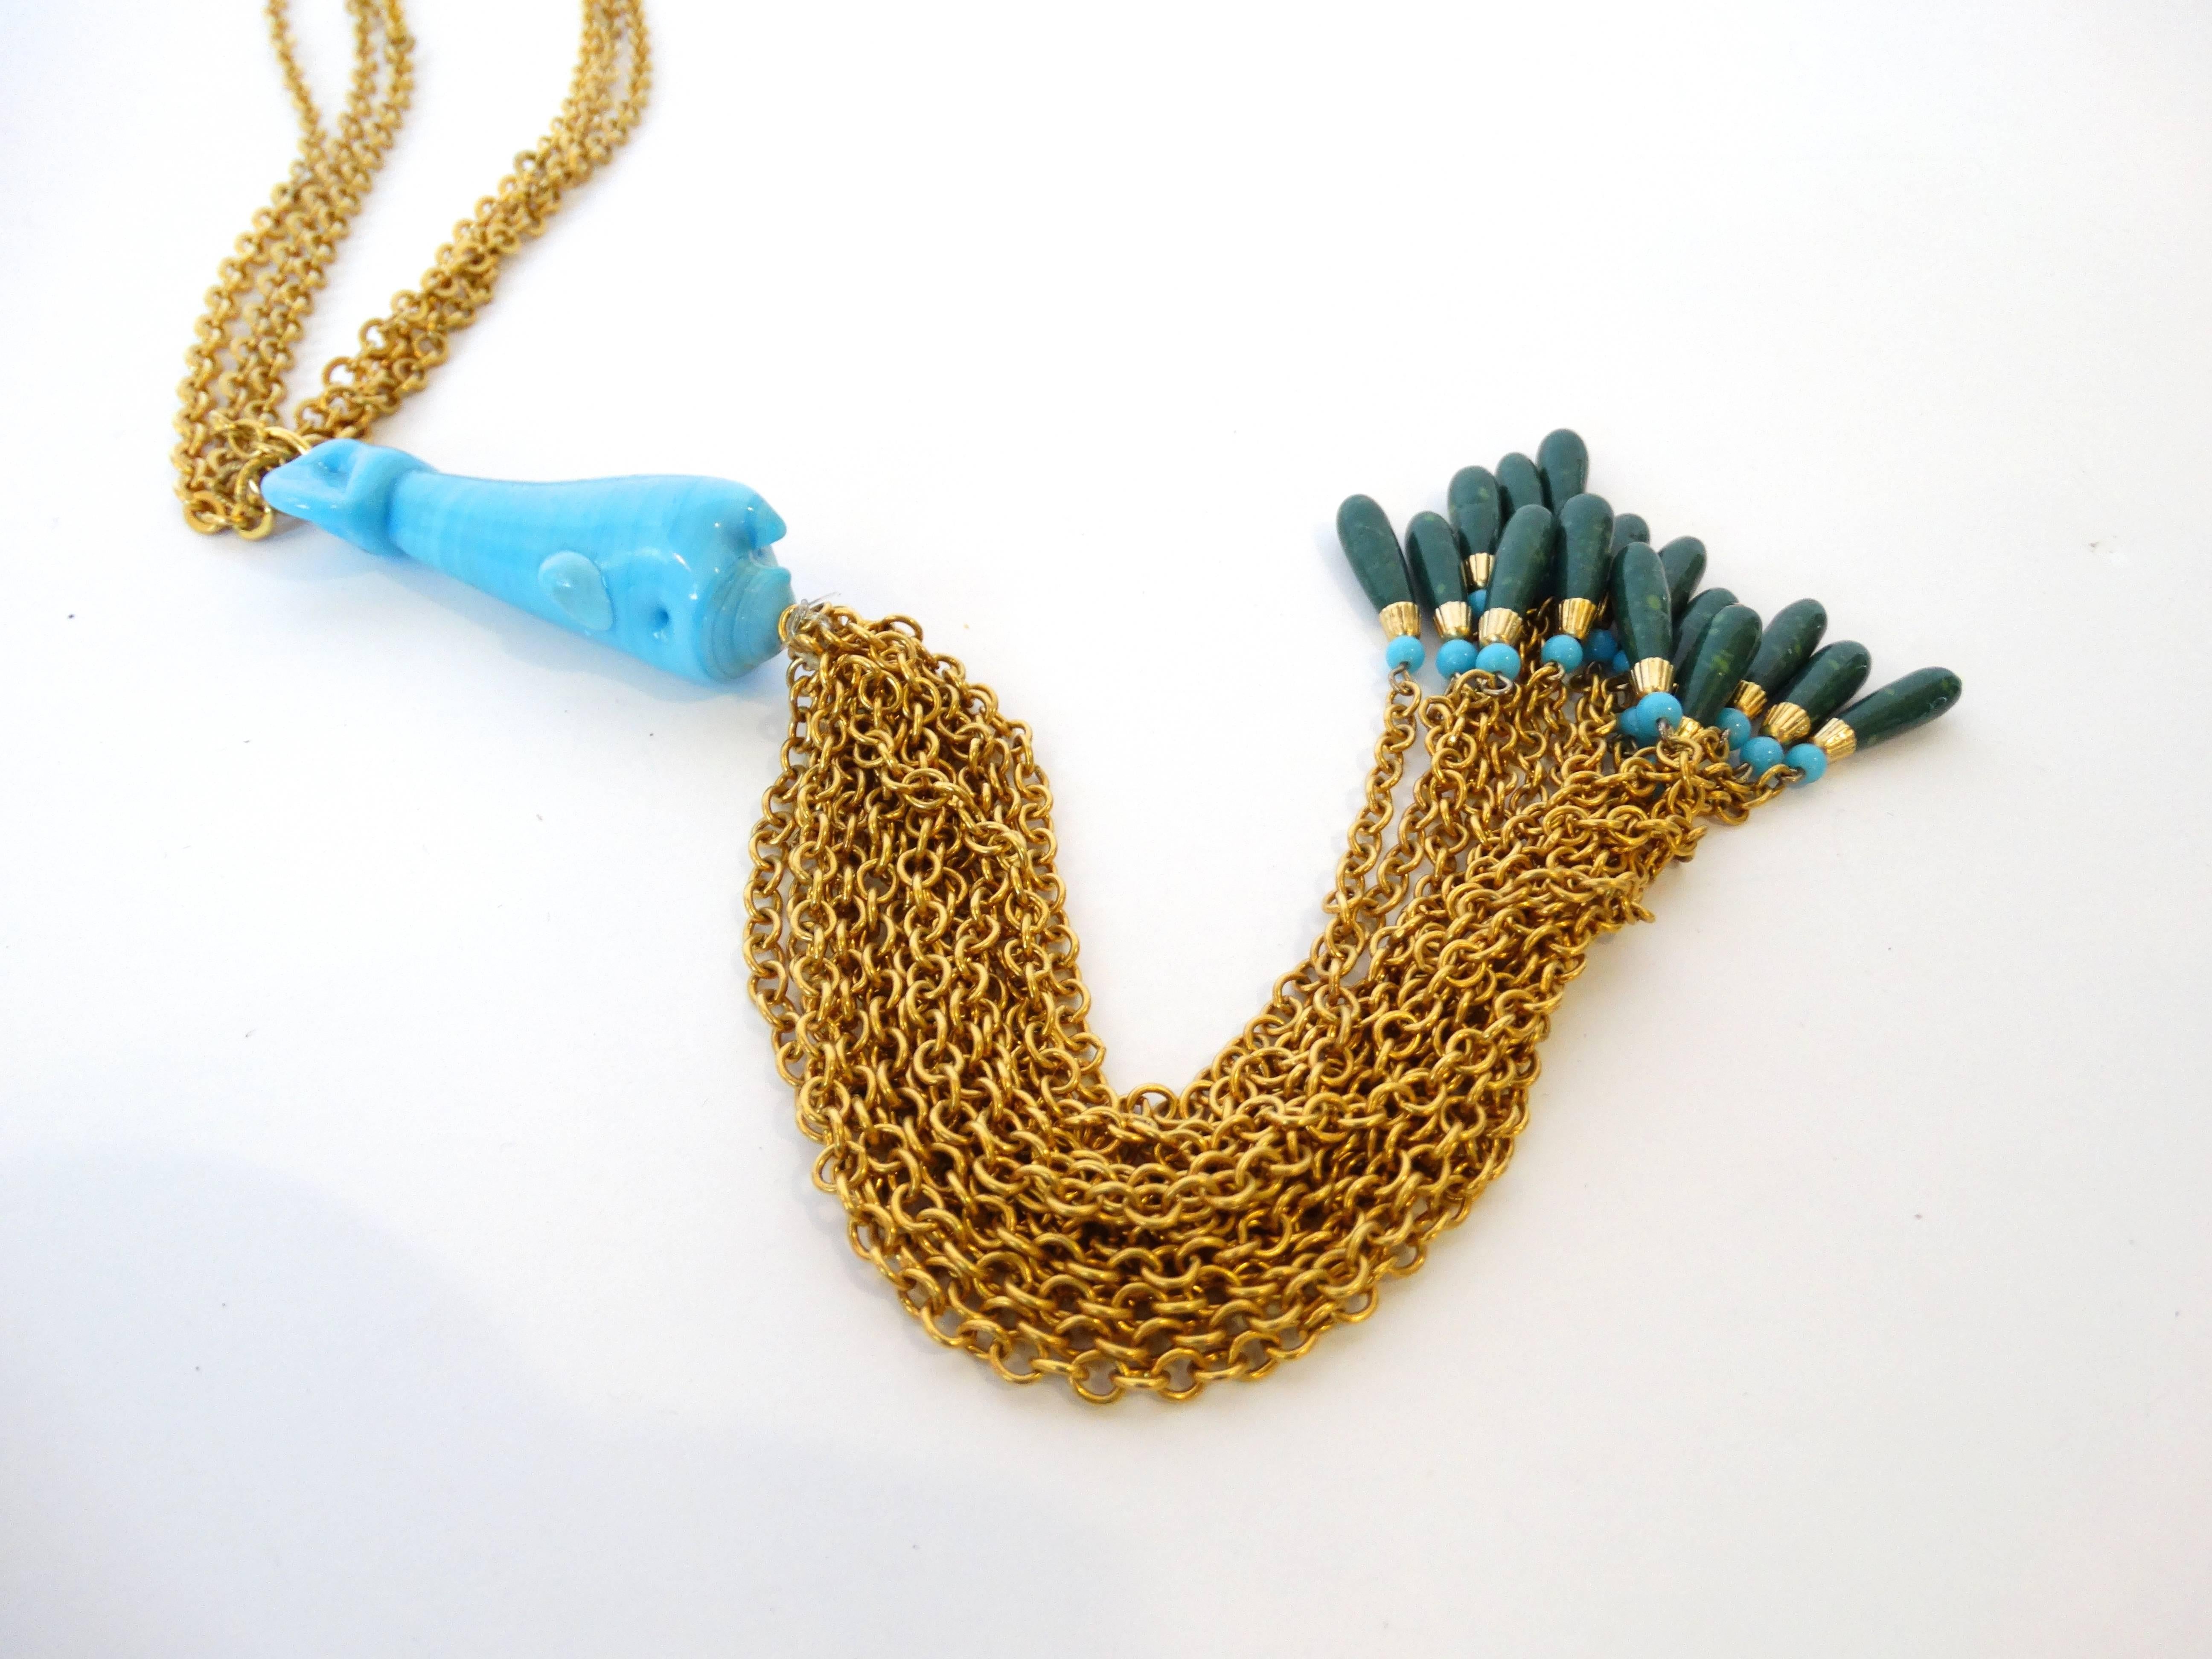 A beautifully sculptured necklace created by William de Lillo in the 70's! This necklace features a turquoise glass whale sculpture in center of the necklace with 15 gold plated chains hanging from the front of the whale that drop down 8